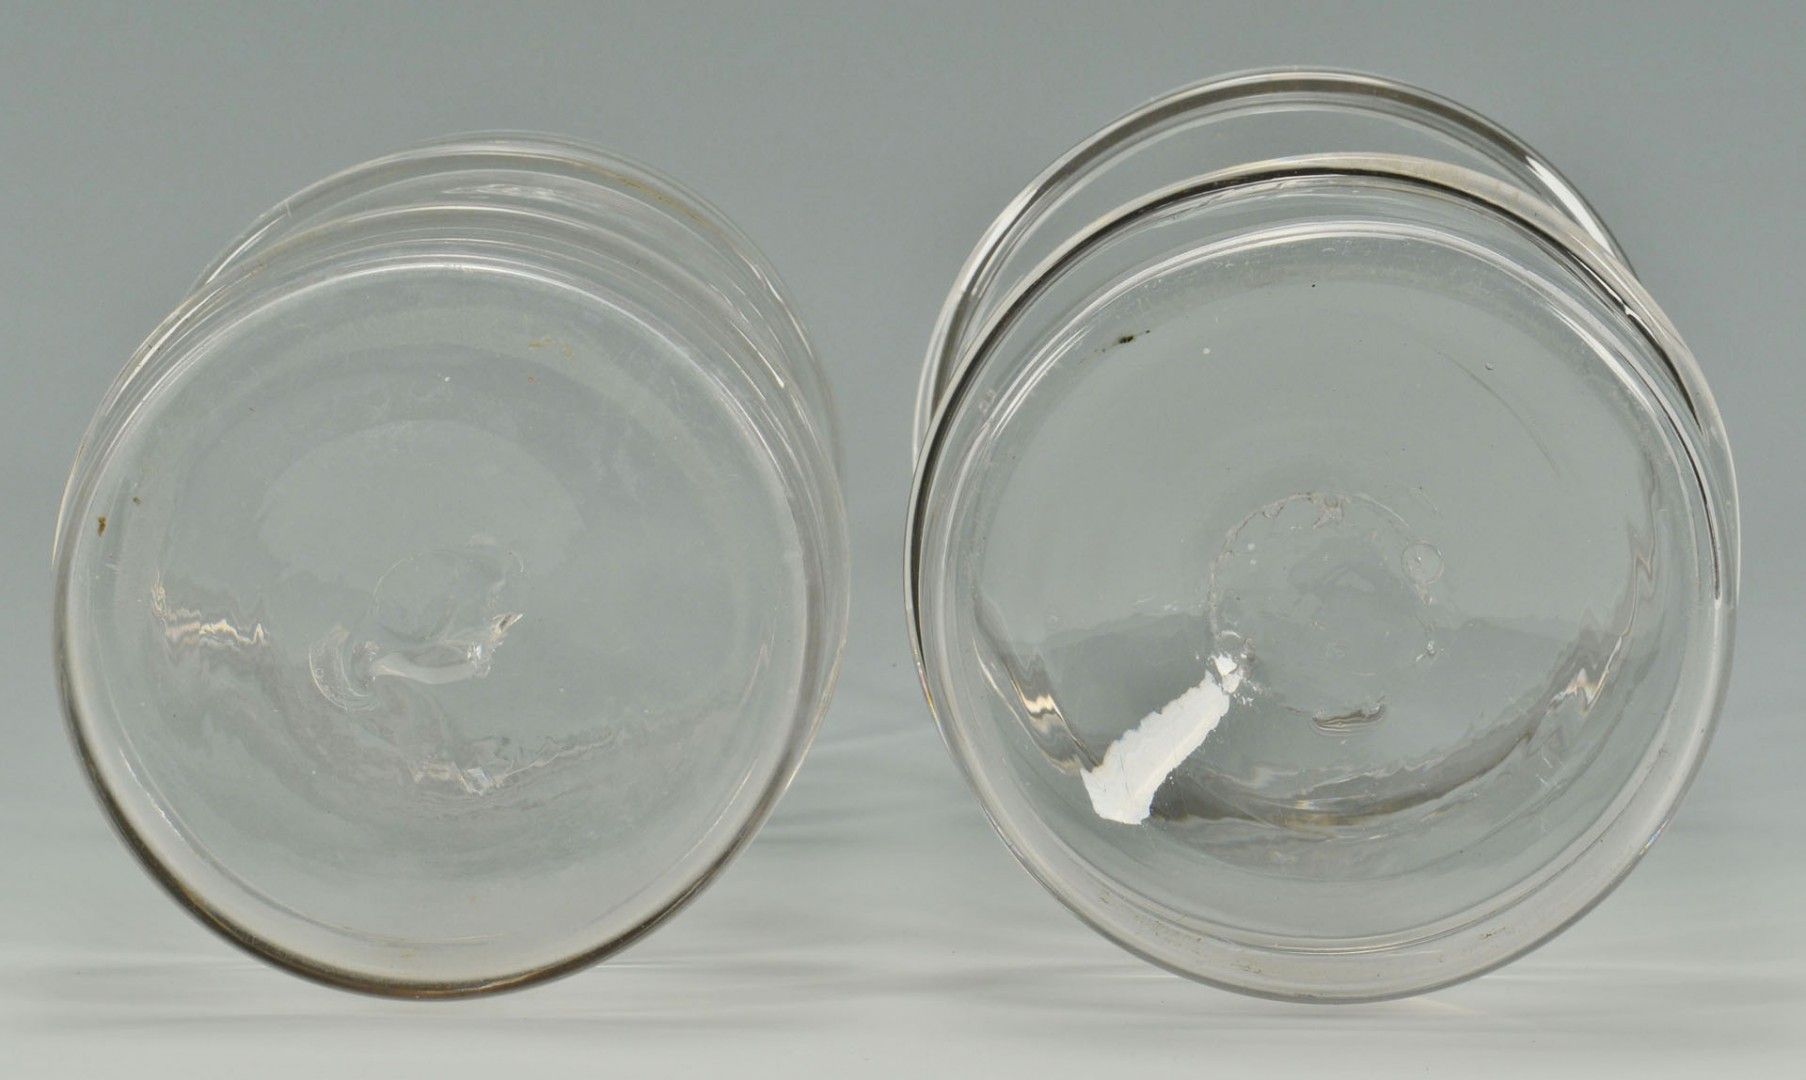 Lot 155: 5 Blown Colorless Glass Canister Jars, 2 bands